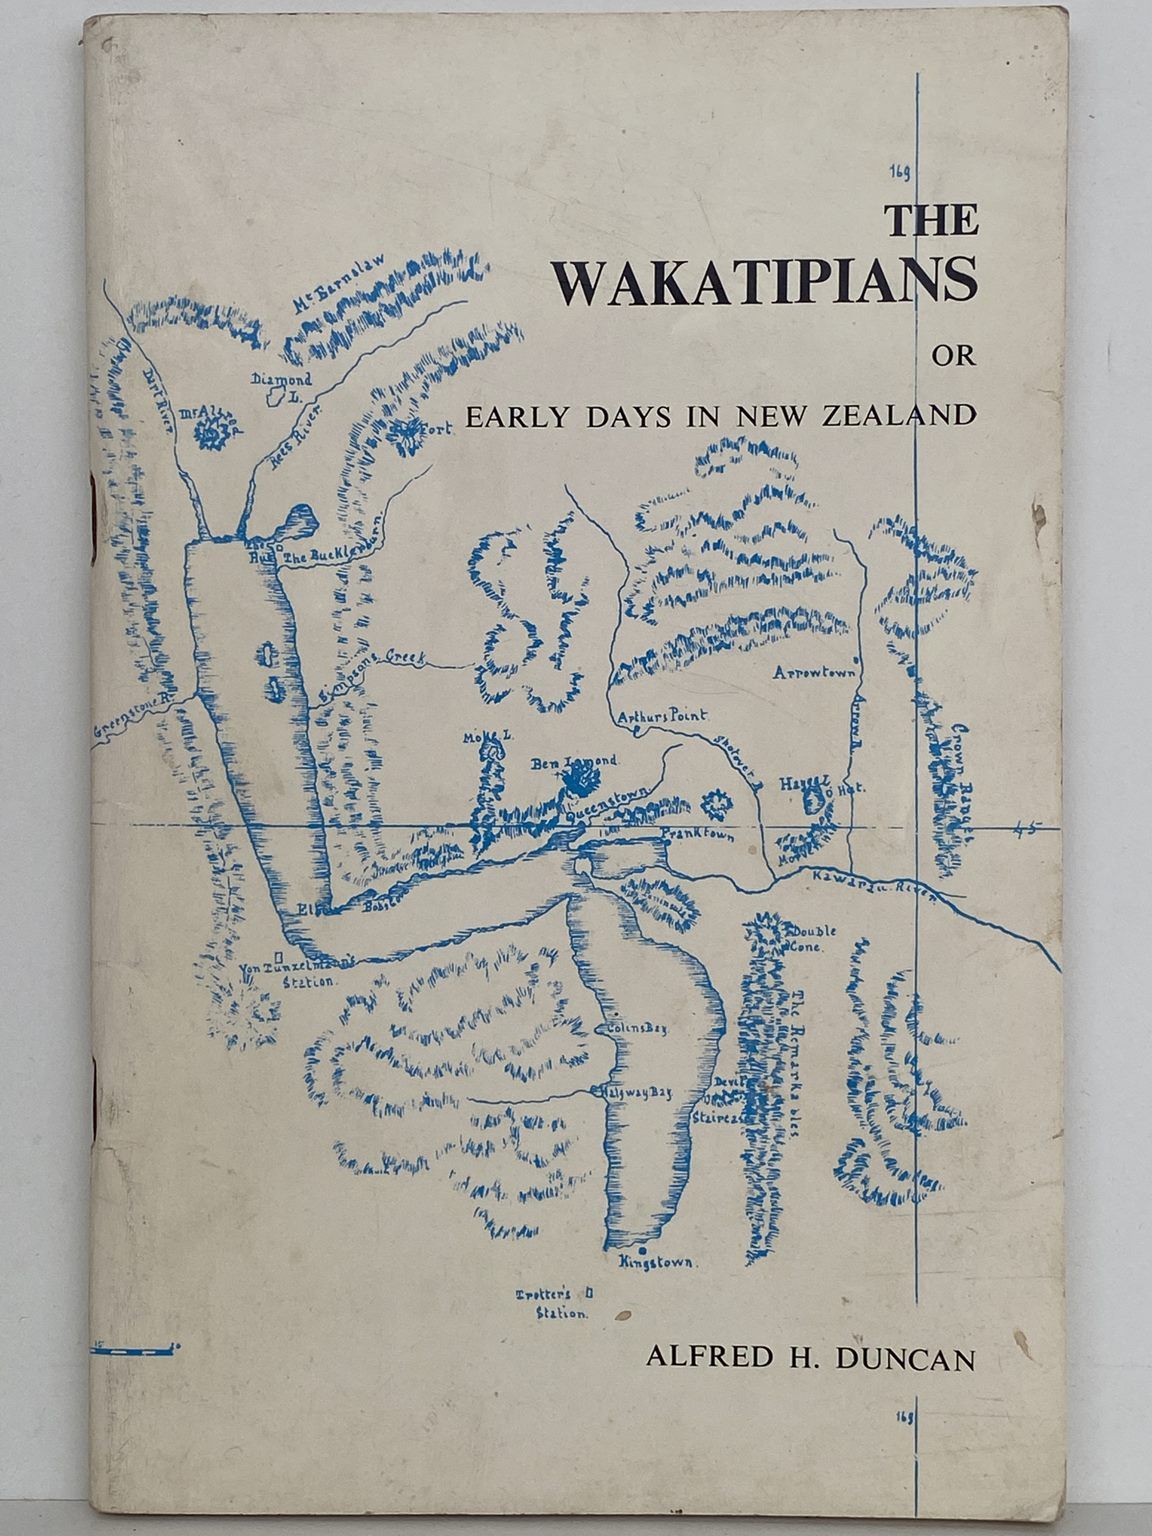 THE WAKATIPIANS or Early Days in New Zealand